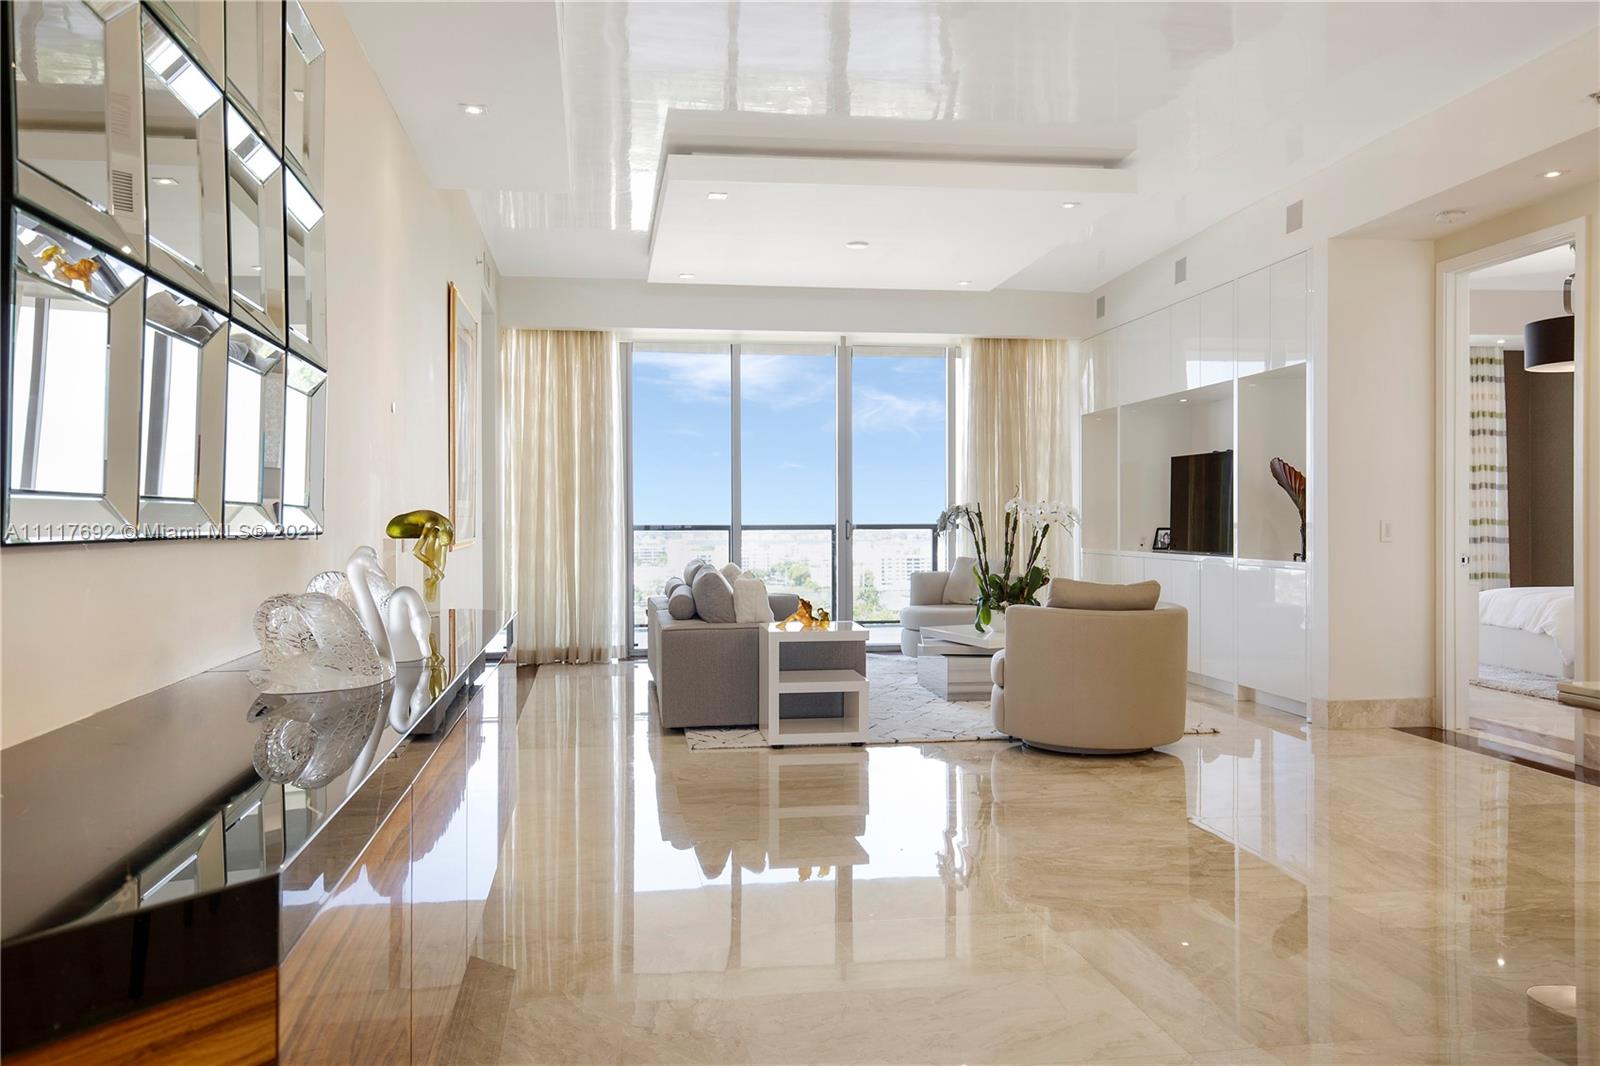 Immaculate oceanfront residence at the iconic St. Regis Bal Harbour. No expense was spared. This beachfront paradise residence features 3 spacious bedrooms plus 3 & 1/2 bathrooms, stunning direct ocean views plus breathtaking sunset views of intracoastal /city skyline. Meticulous designed and high end finishes throughout with top-of-the-line appliances. Best deal at St. Regis for your most discerning client. Furniture is not included but negotiable. See Broker's remarks